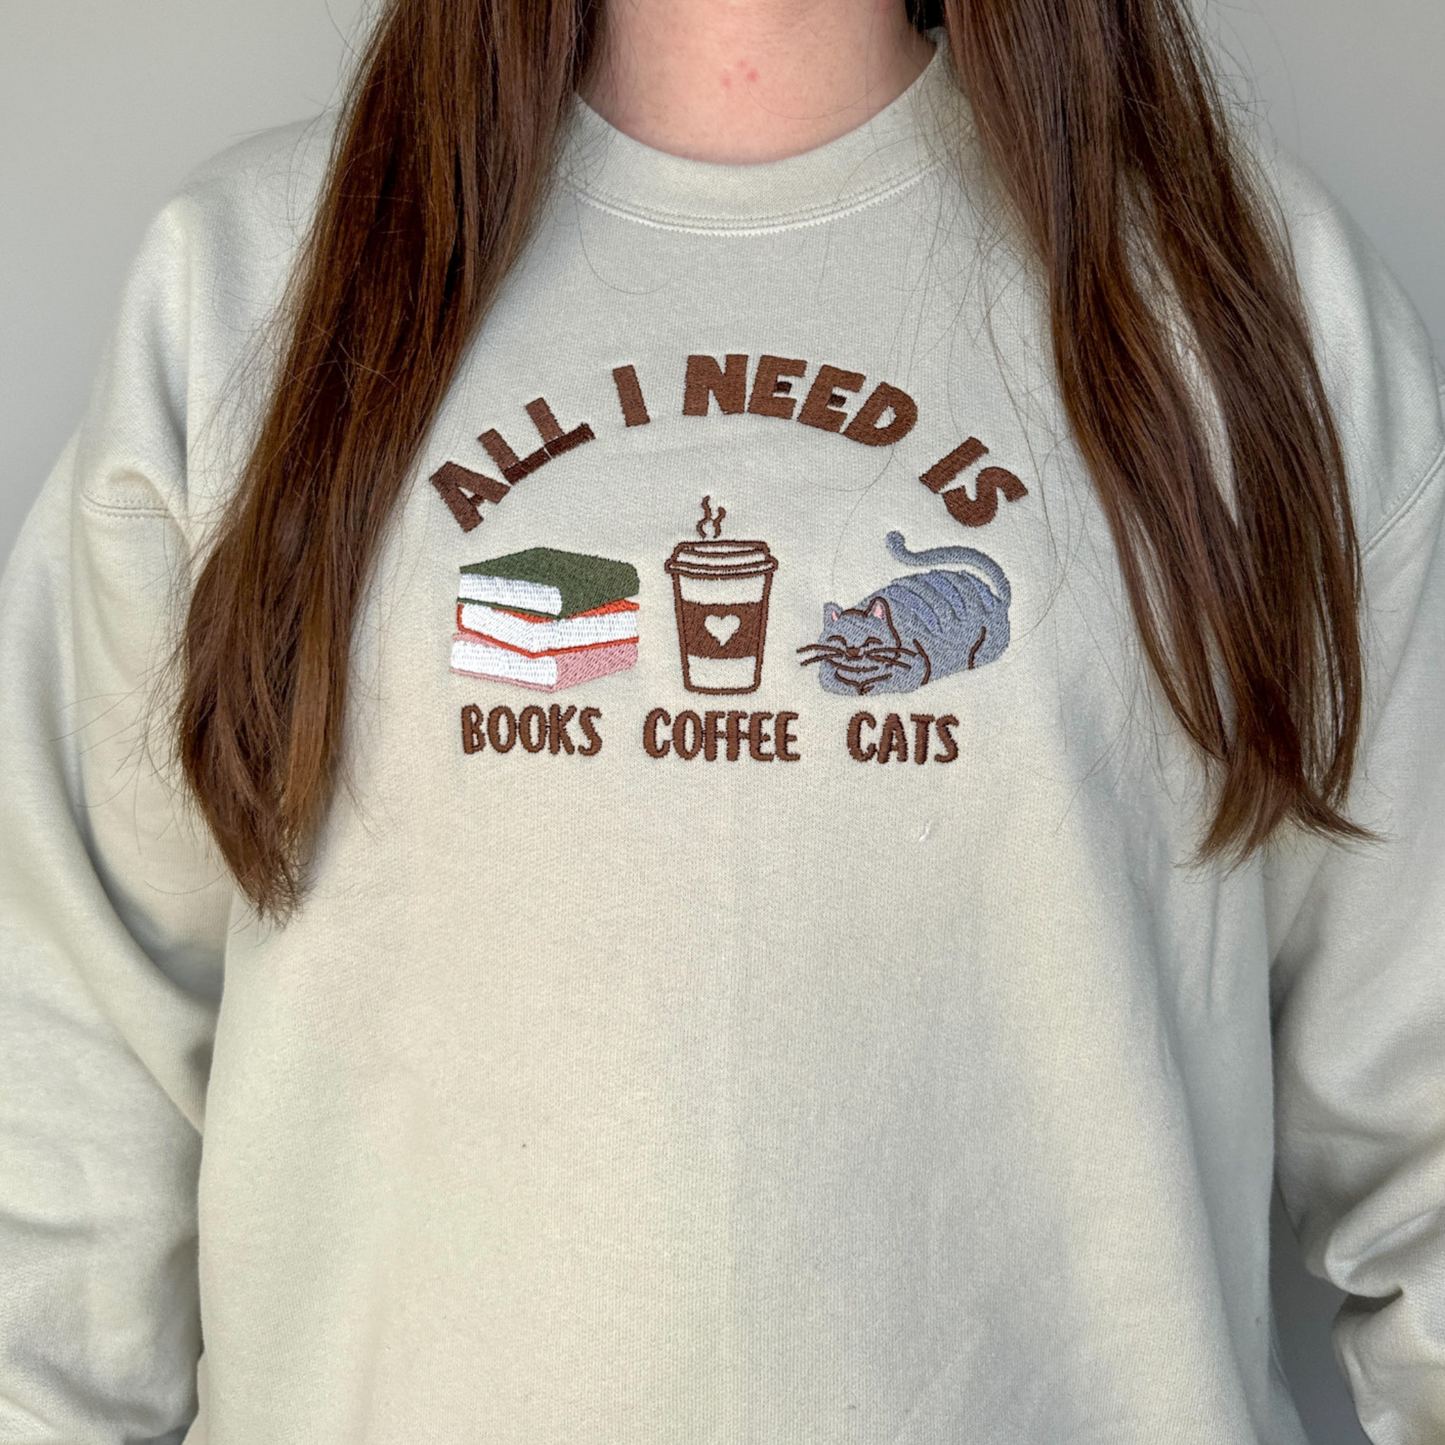 All I Need Is Books, Coffee, Cats Embroidered Crewneck